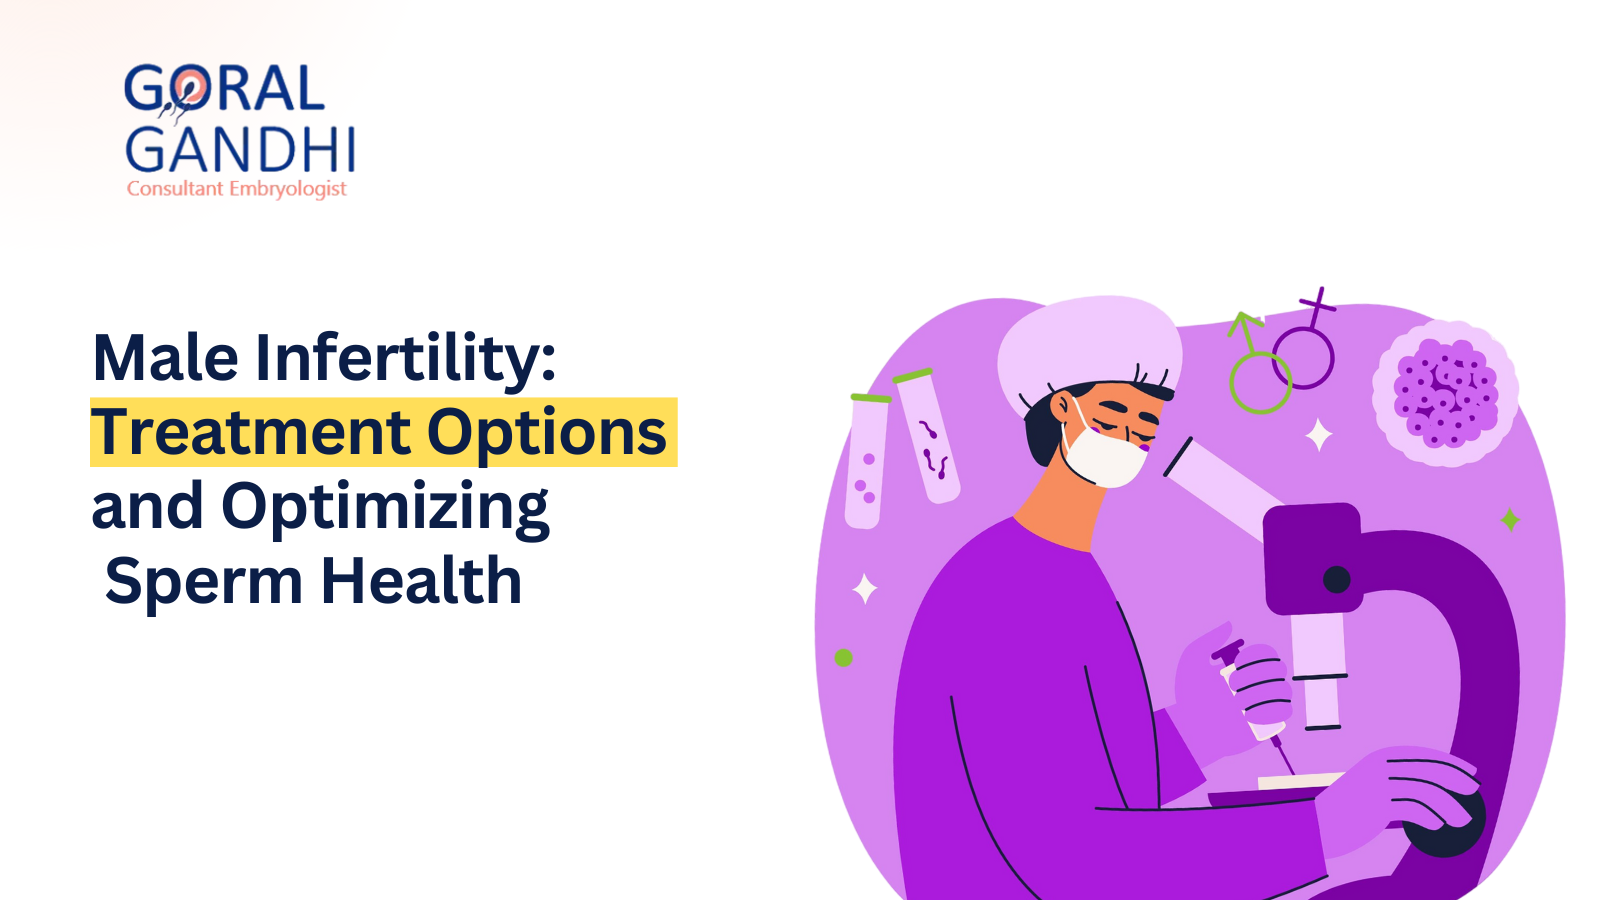 Male Infertility: Treatment Options and Optimising Sperm Health